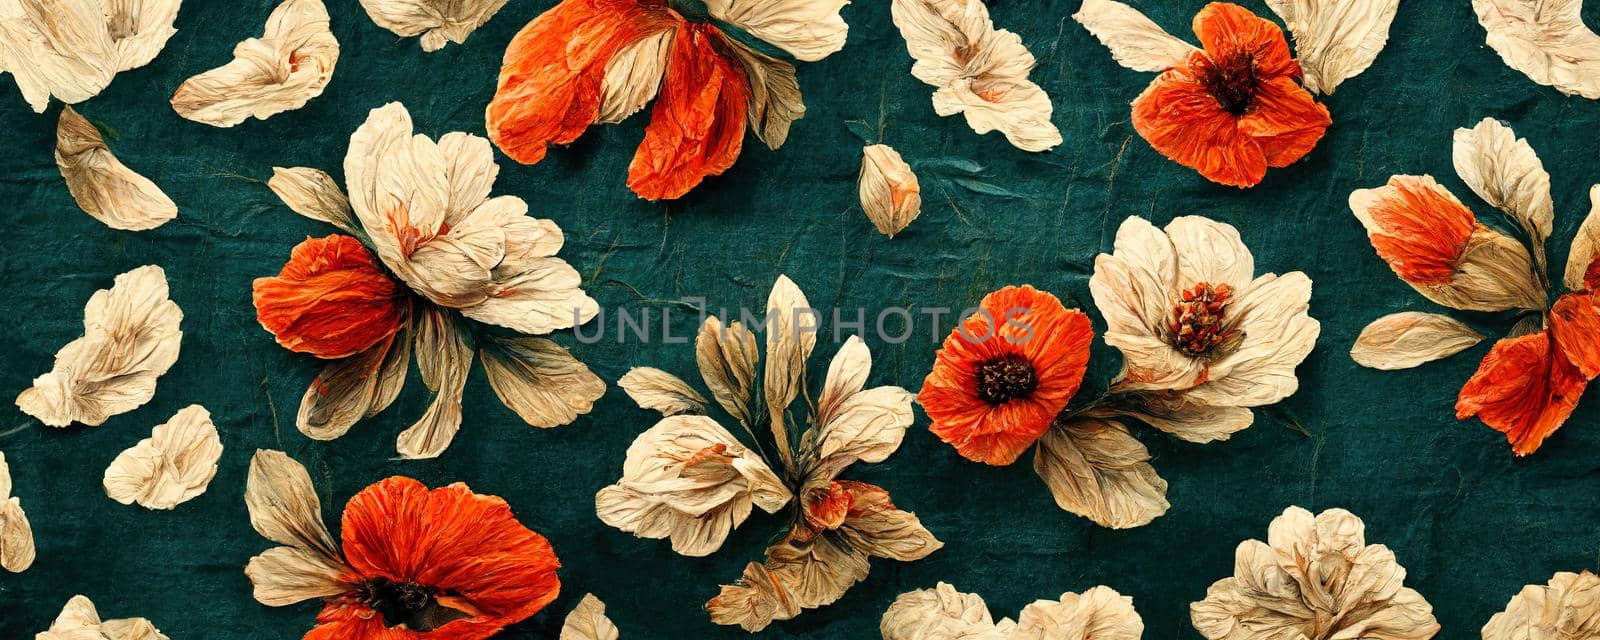 abstract pattern on the fabric in the form of flowers in warm shades of red, green and cream.